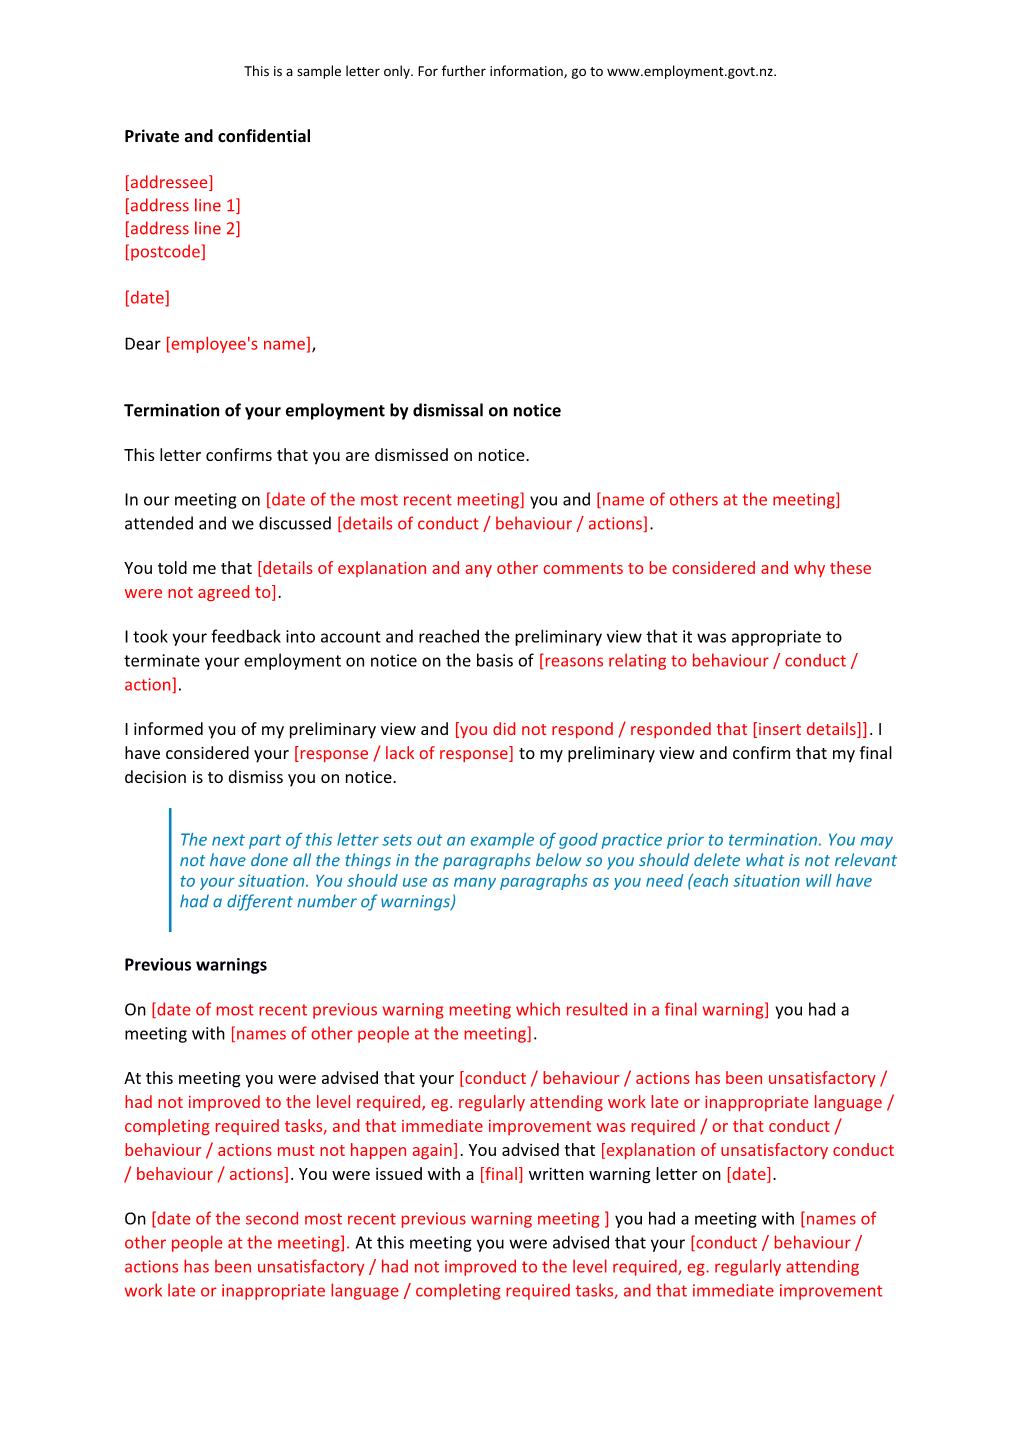 Information About Sample Letter - Termination of Employment (Dismissal on Notice)